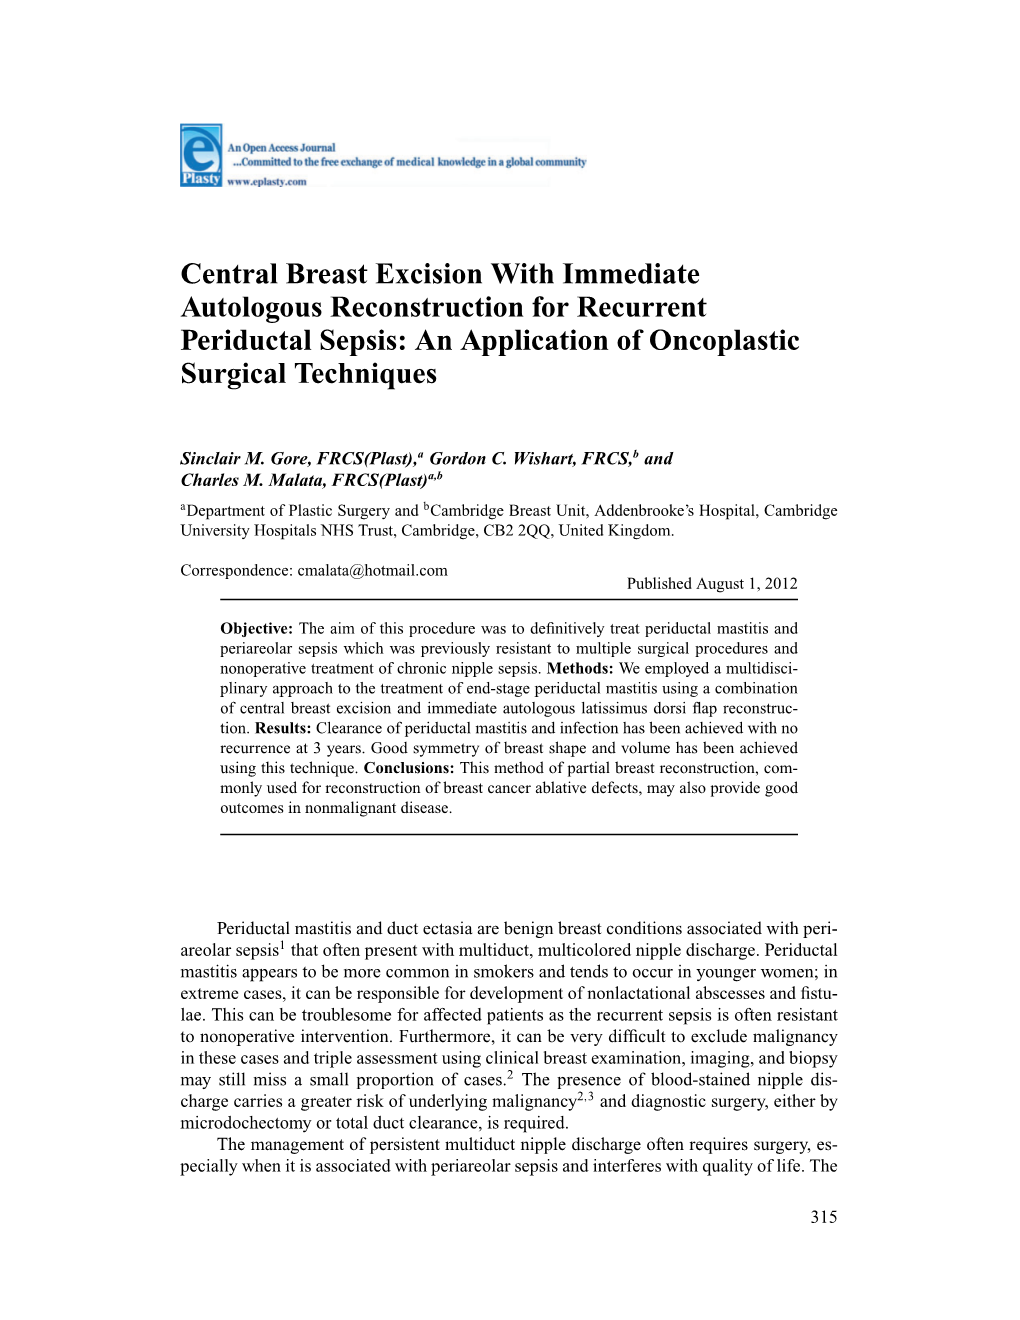 Central Breast Excision with Immediate Autologous Reconstruction for Recurrent Periductal Sepsis: an Application of Oncoplastic Surgical Techniques